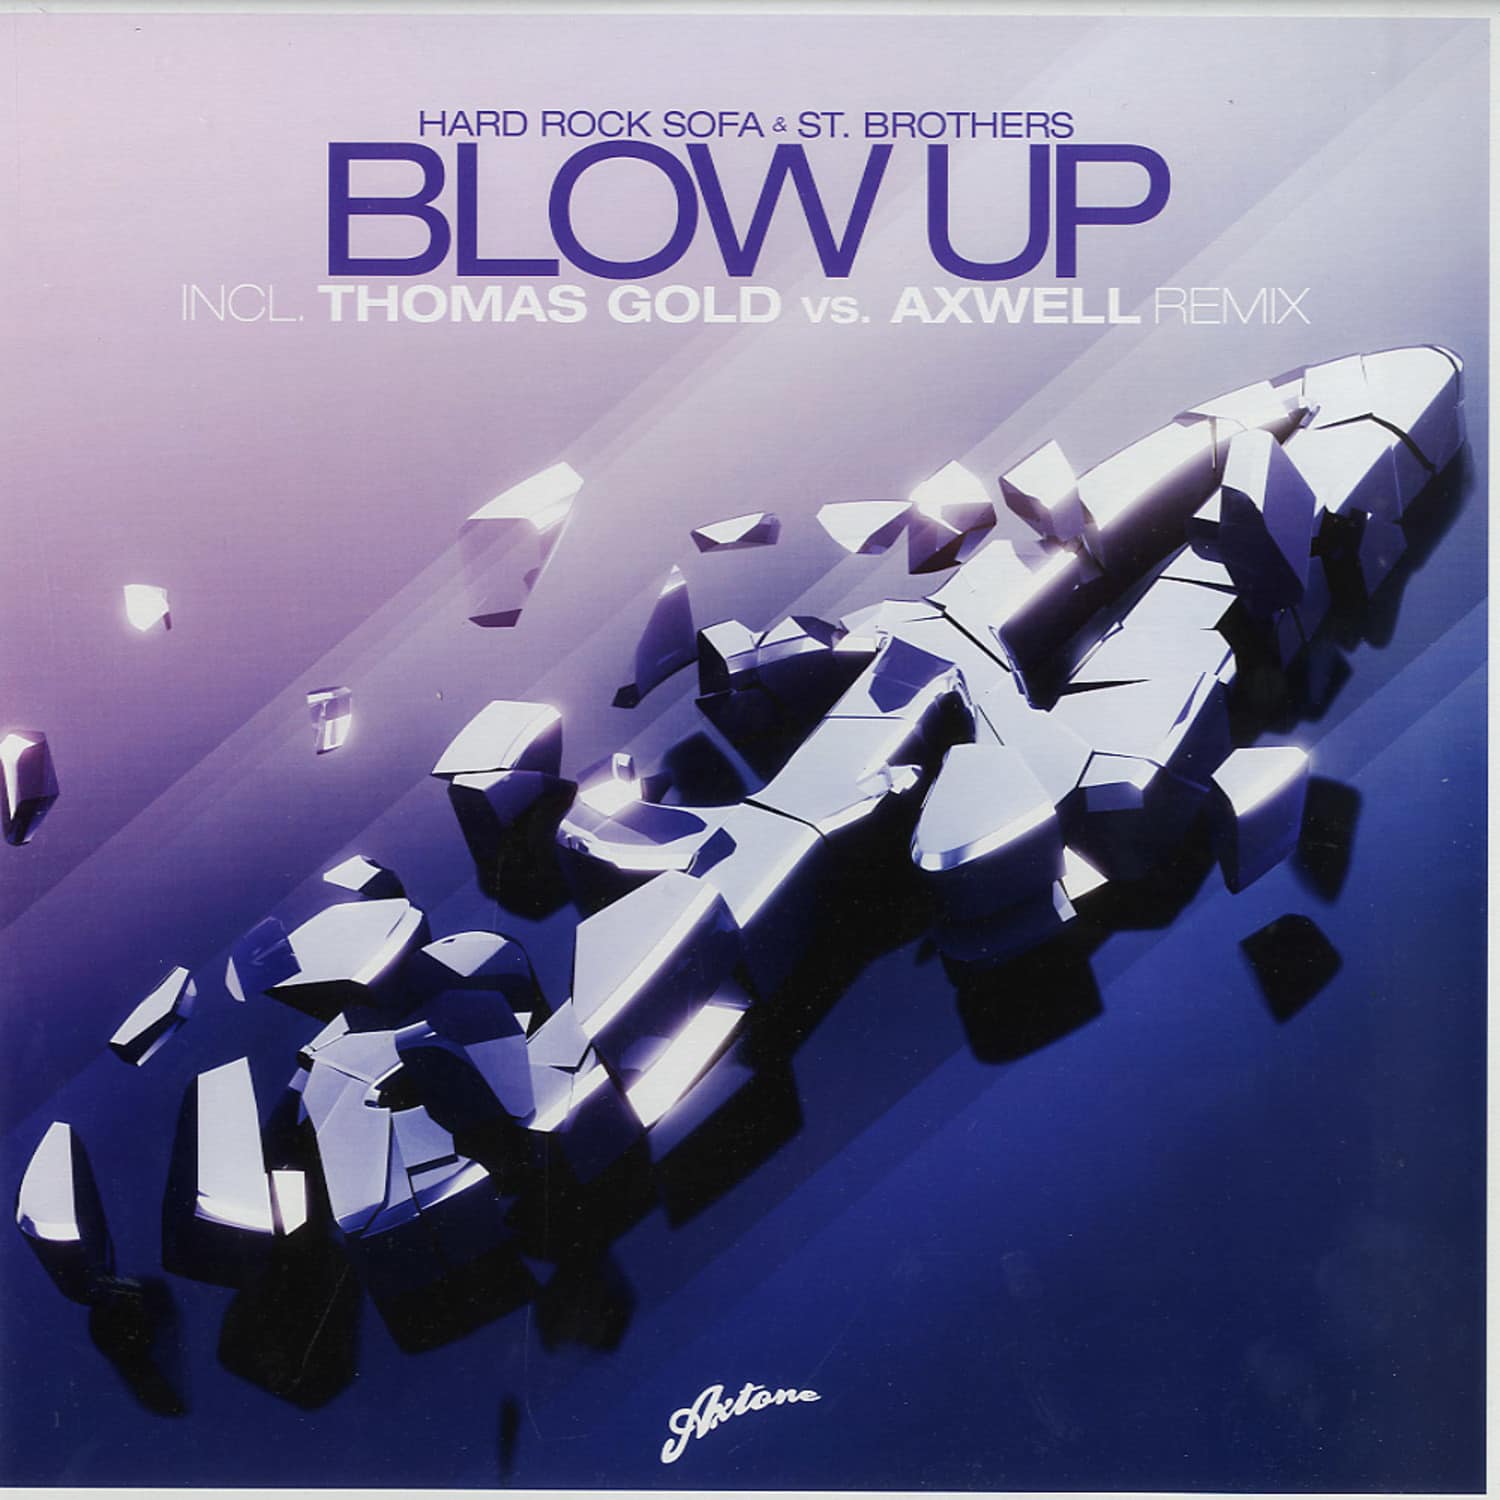 Hard Rock Sofia & St. Brothers - BLOW UP REMIXES 